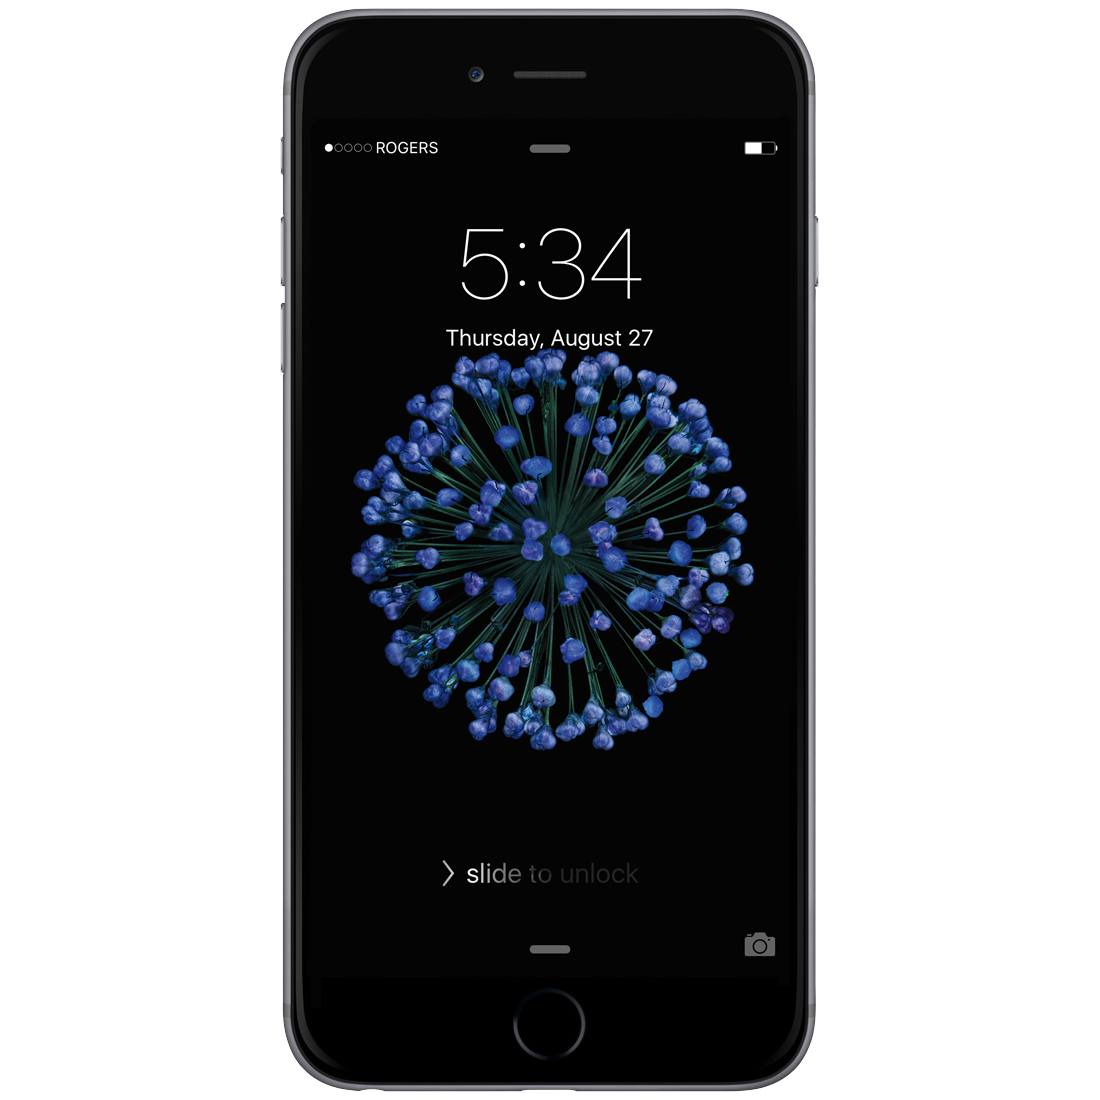 iPhone 6s to Feature Motion Wallpapers Similar to the Apple Watch?